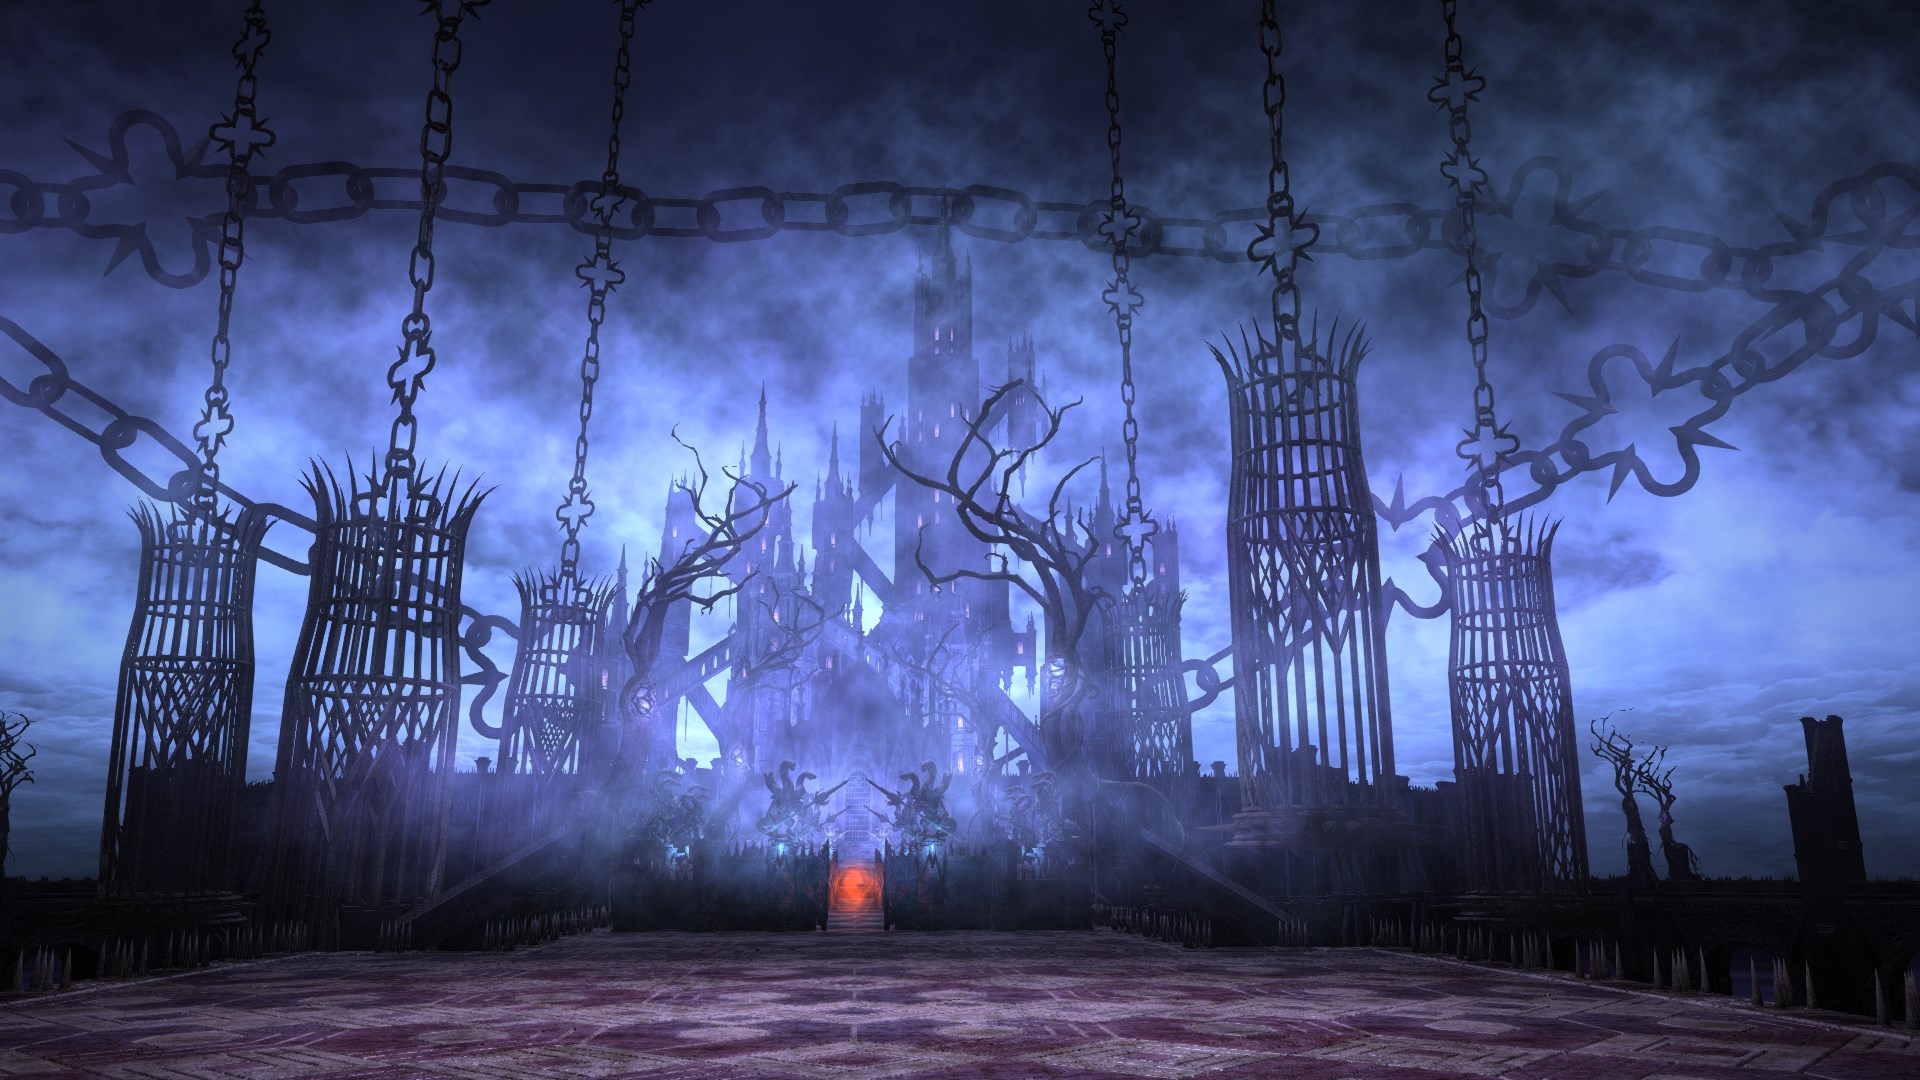 A haunted-looking building with lots of cages on chains, as seen in Final Fantasy 14: Endwalker’s Pandaemonium raid series